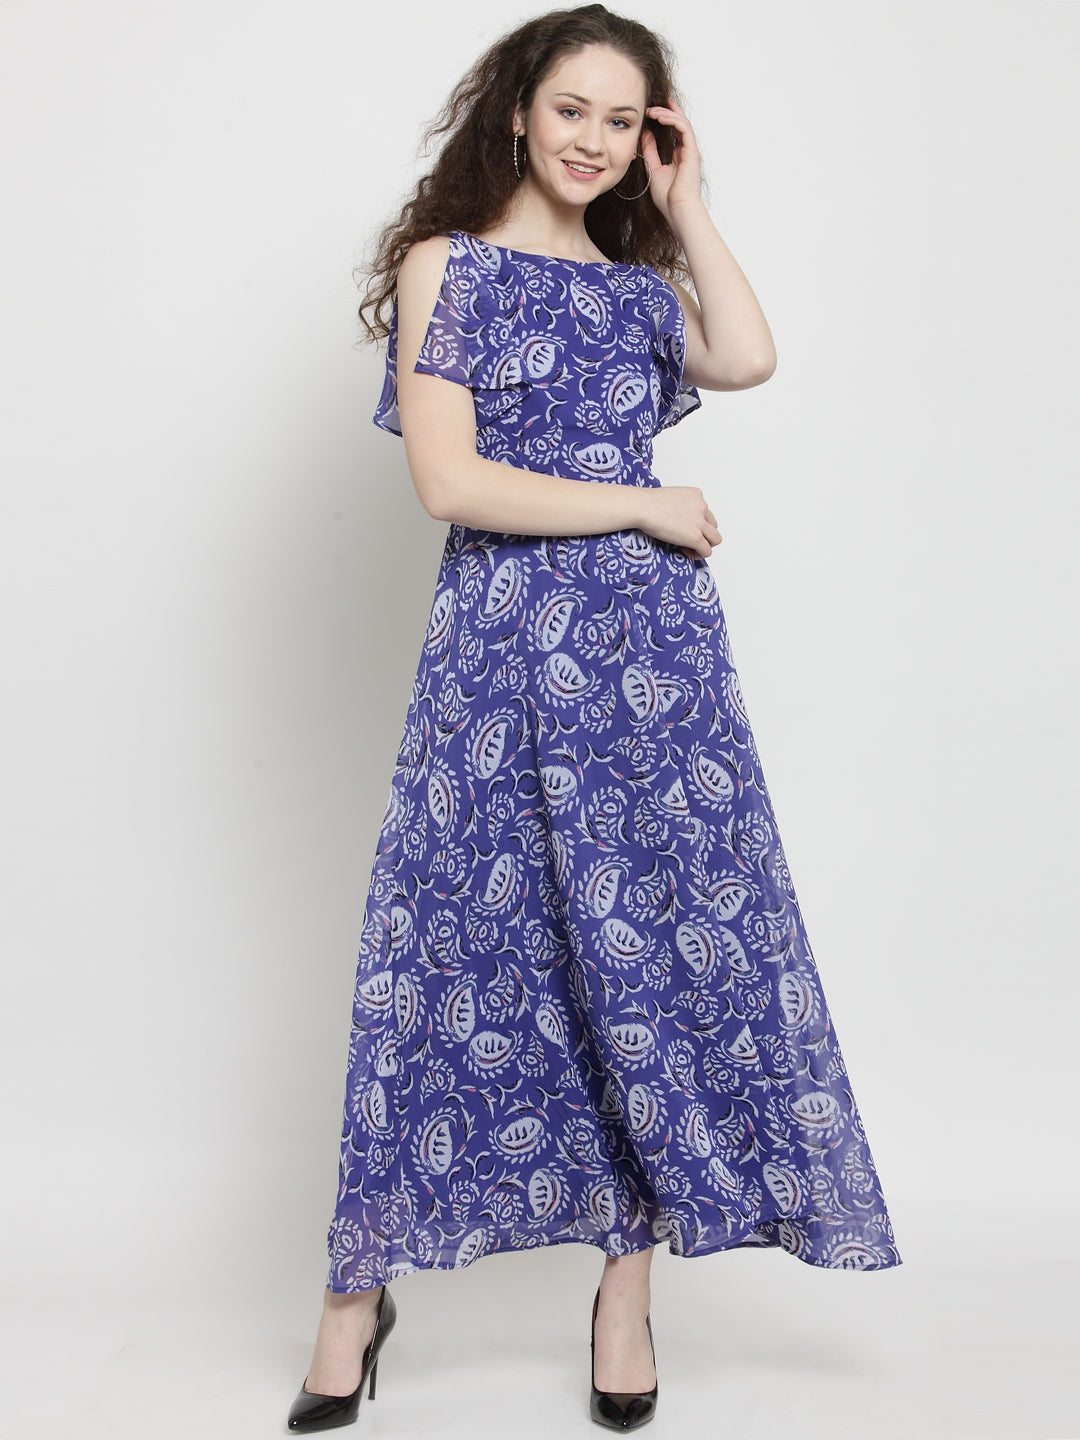 Paisley Print Maxi Dress With Cold Shoulder